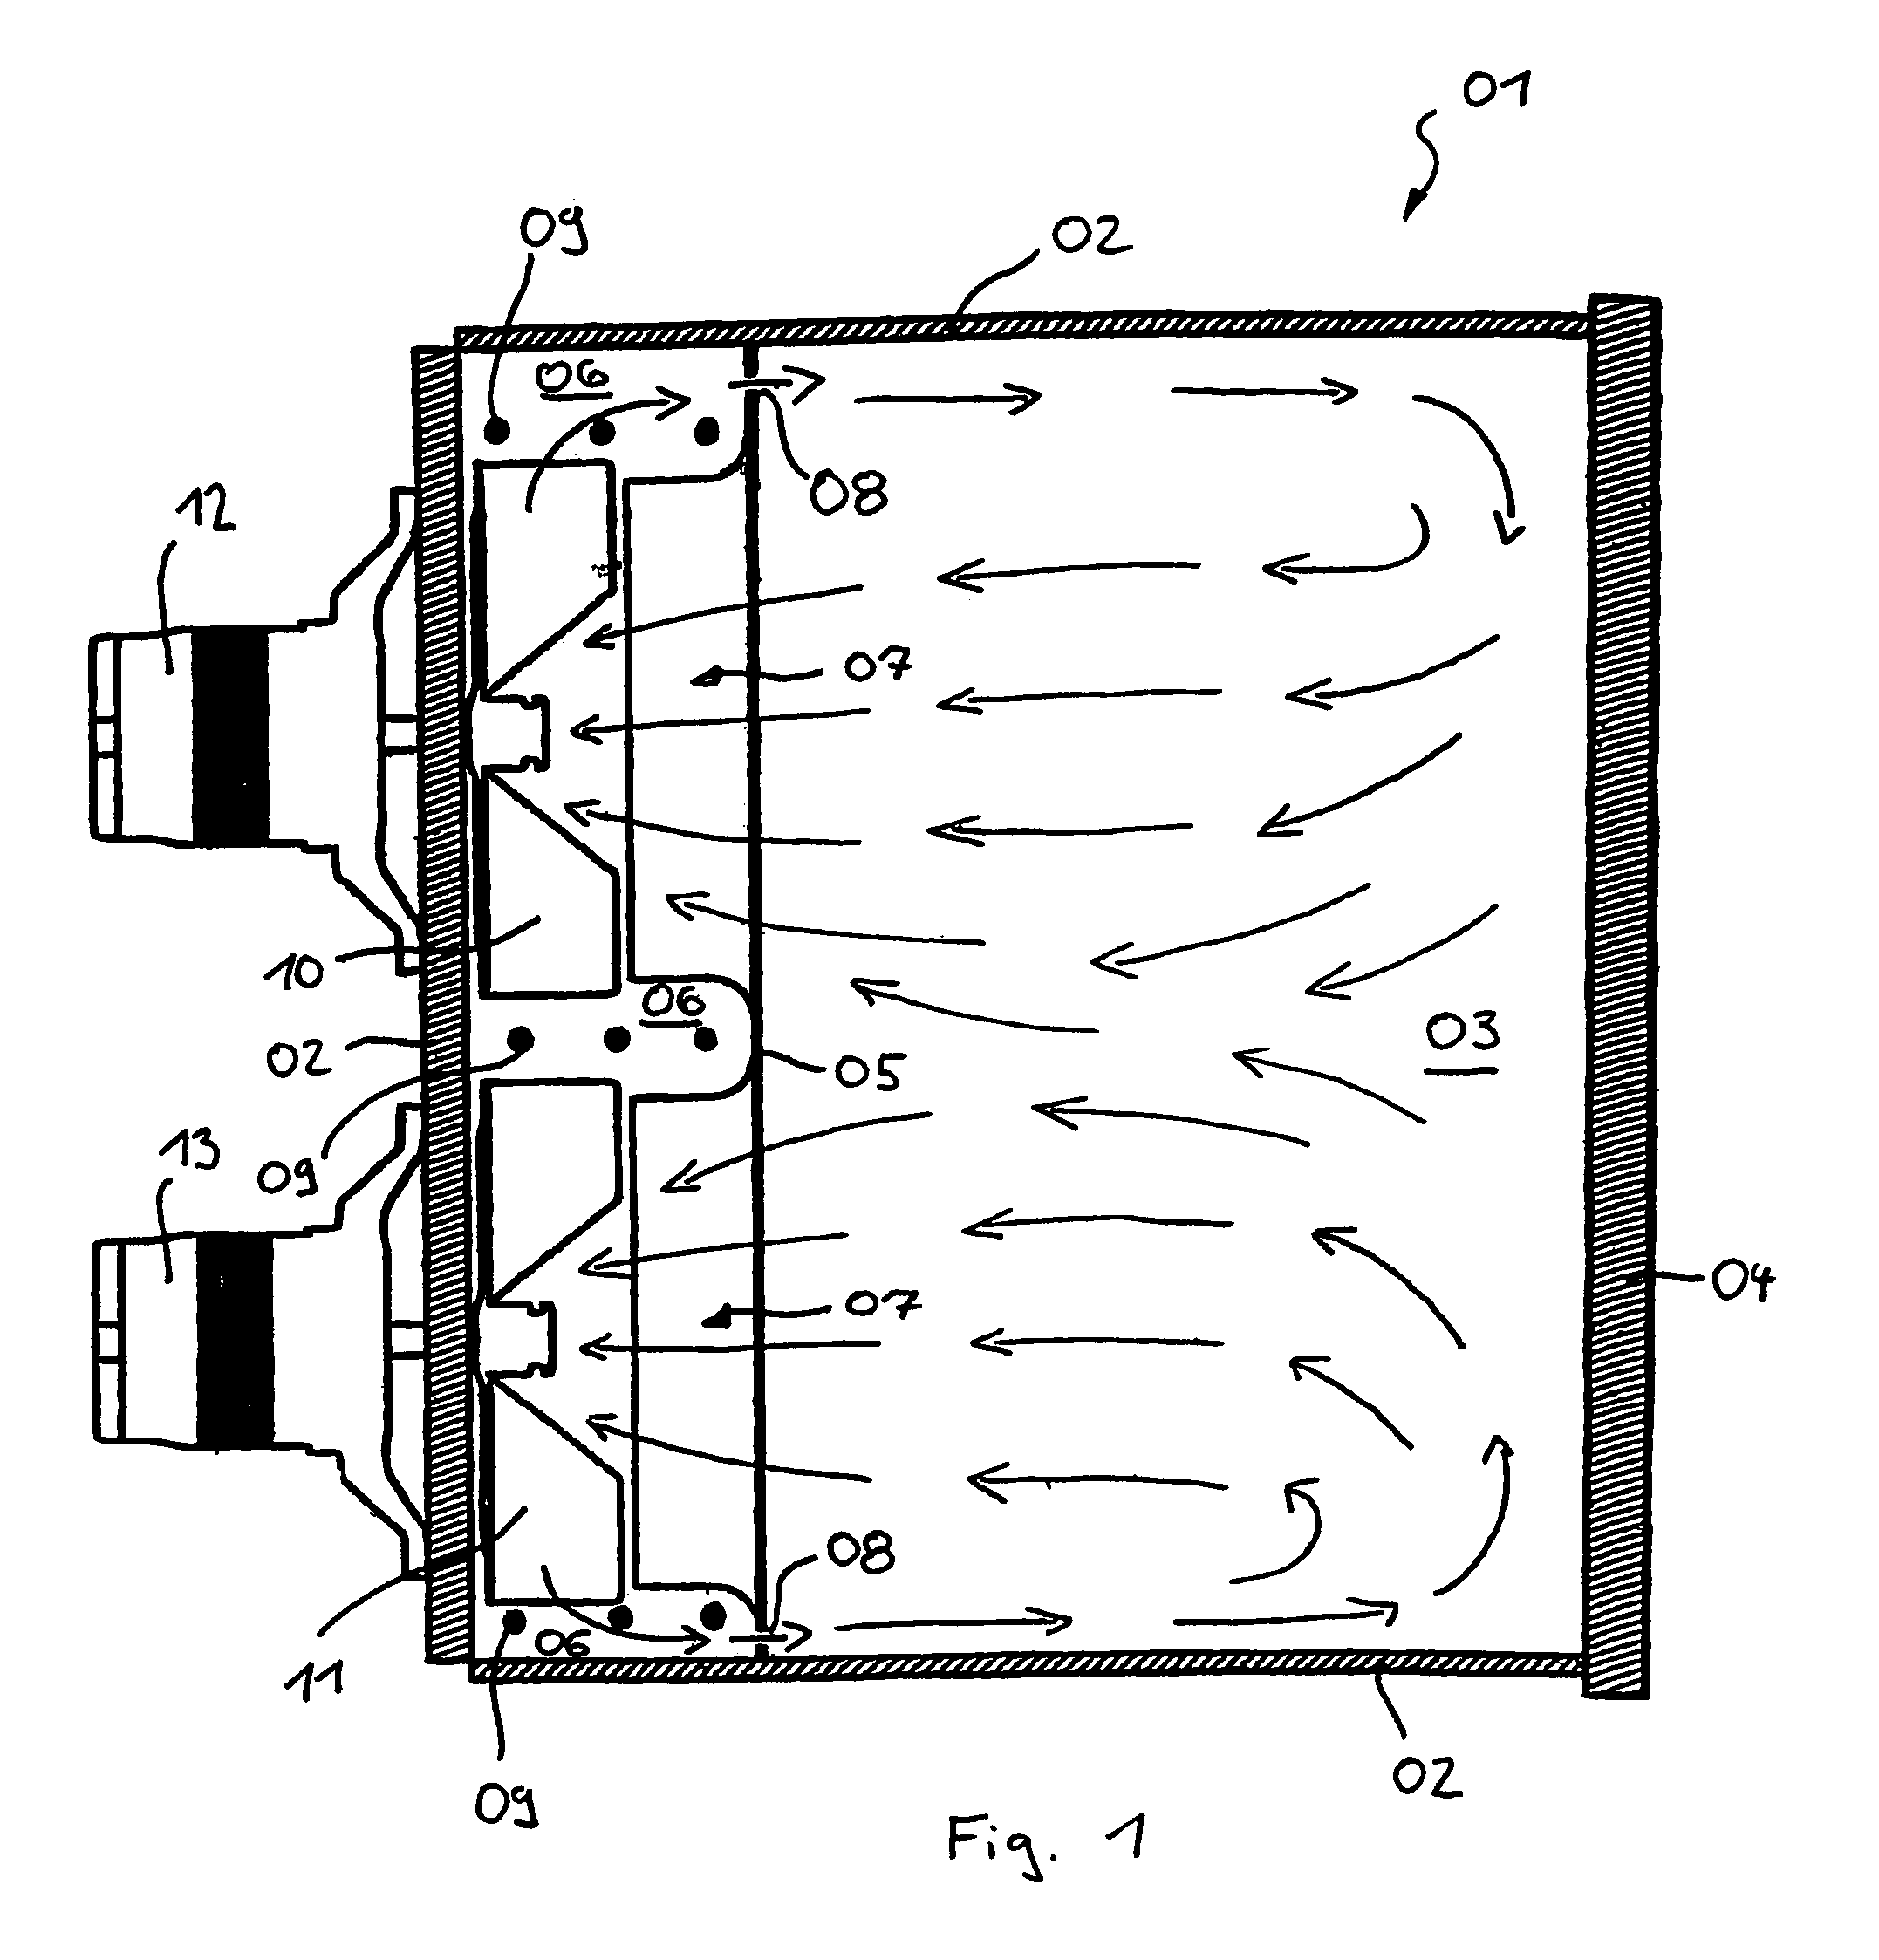 Baking oven and method of operating a baking oven